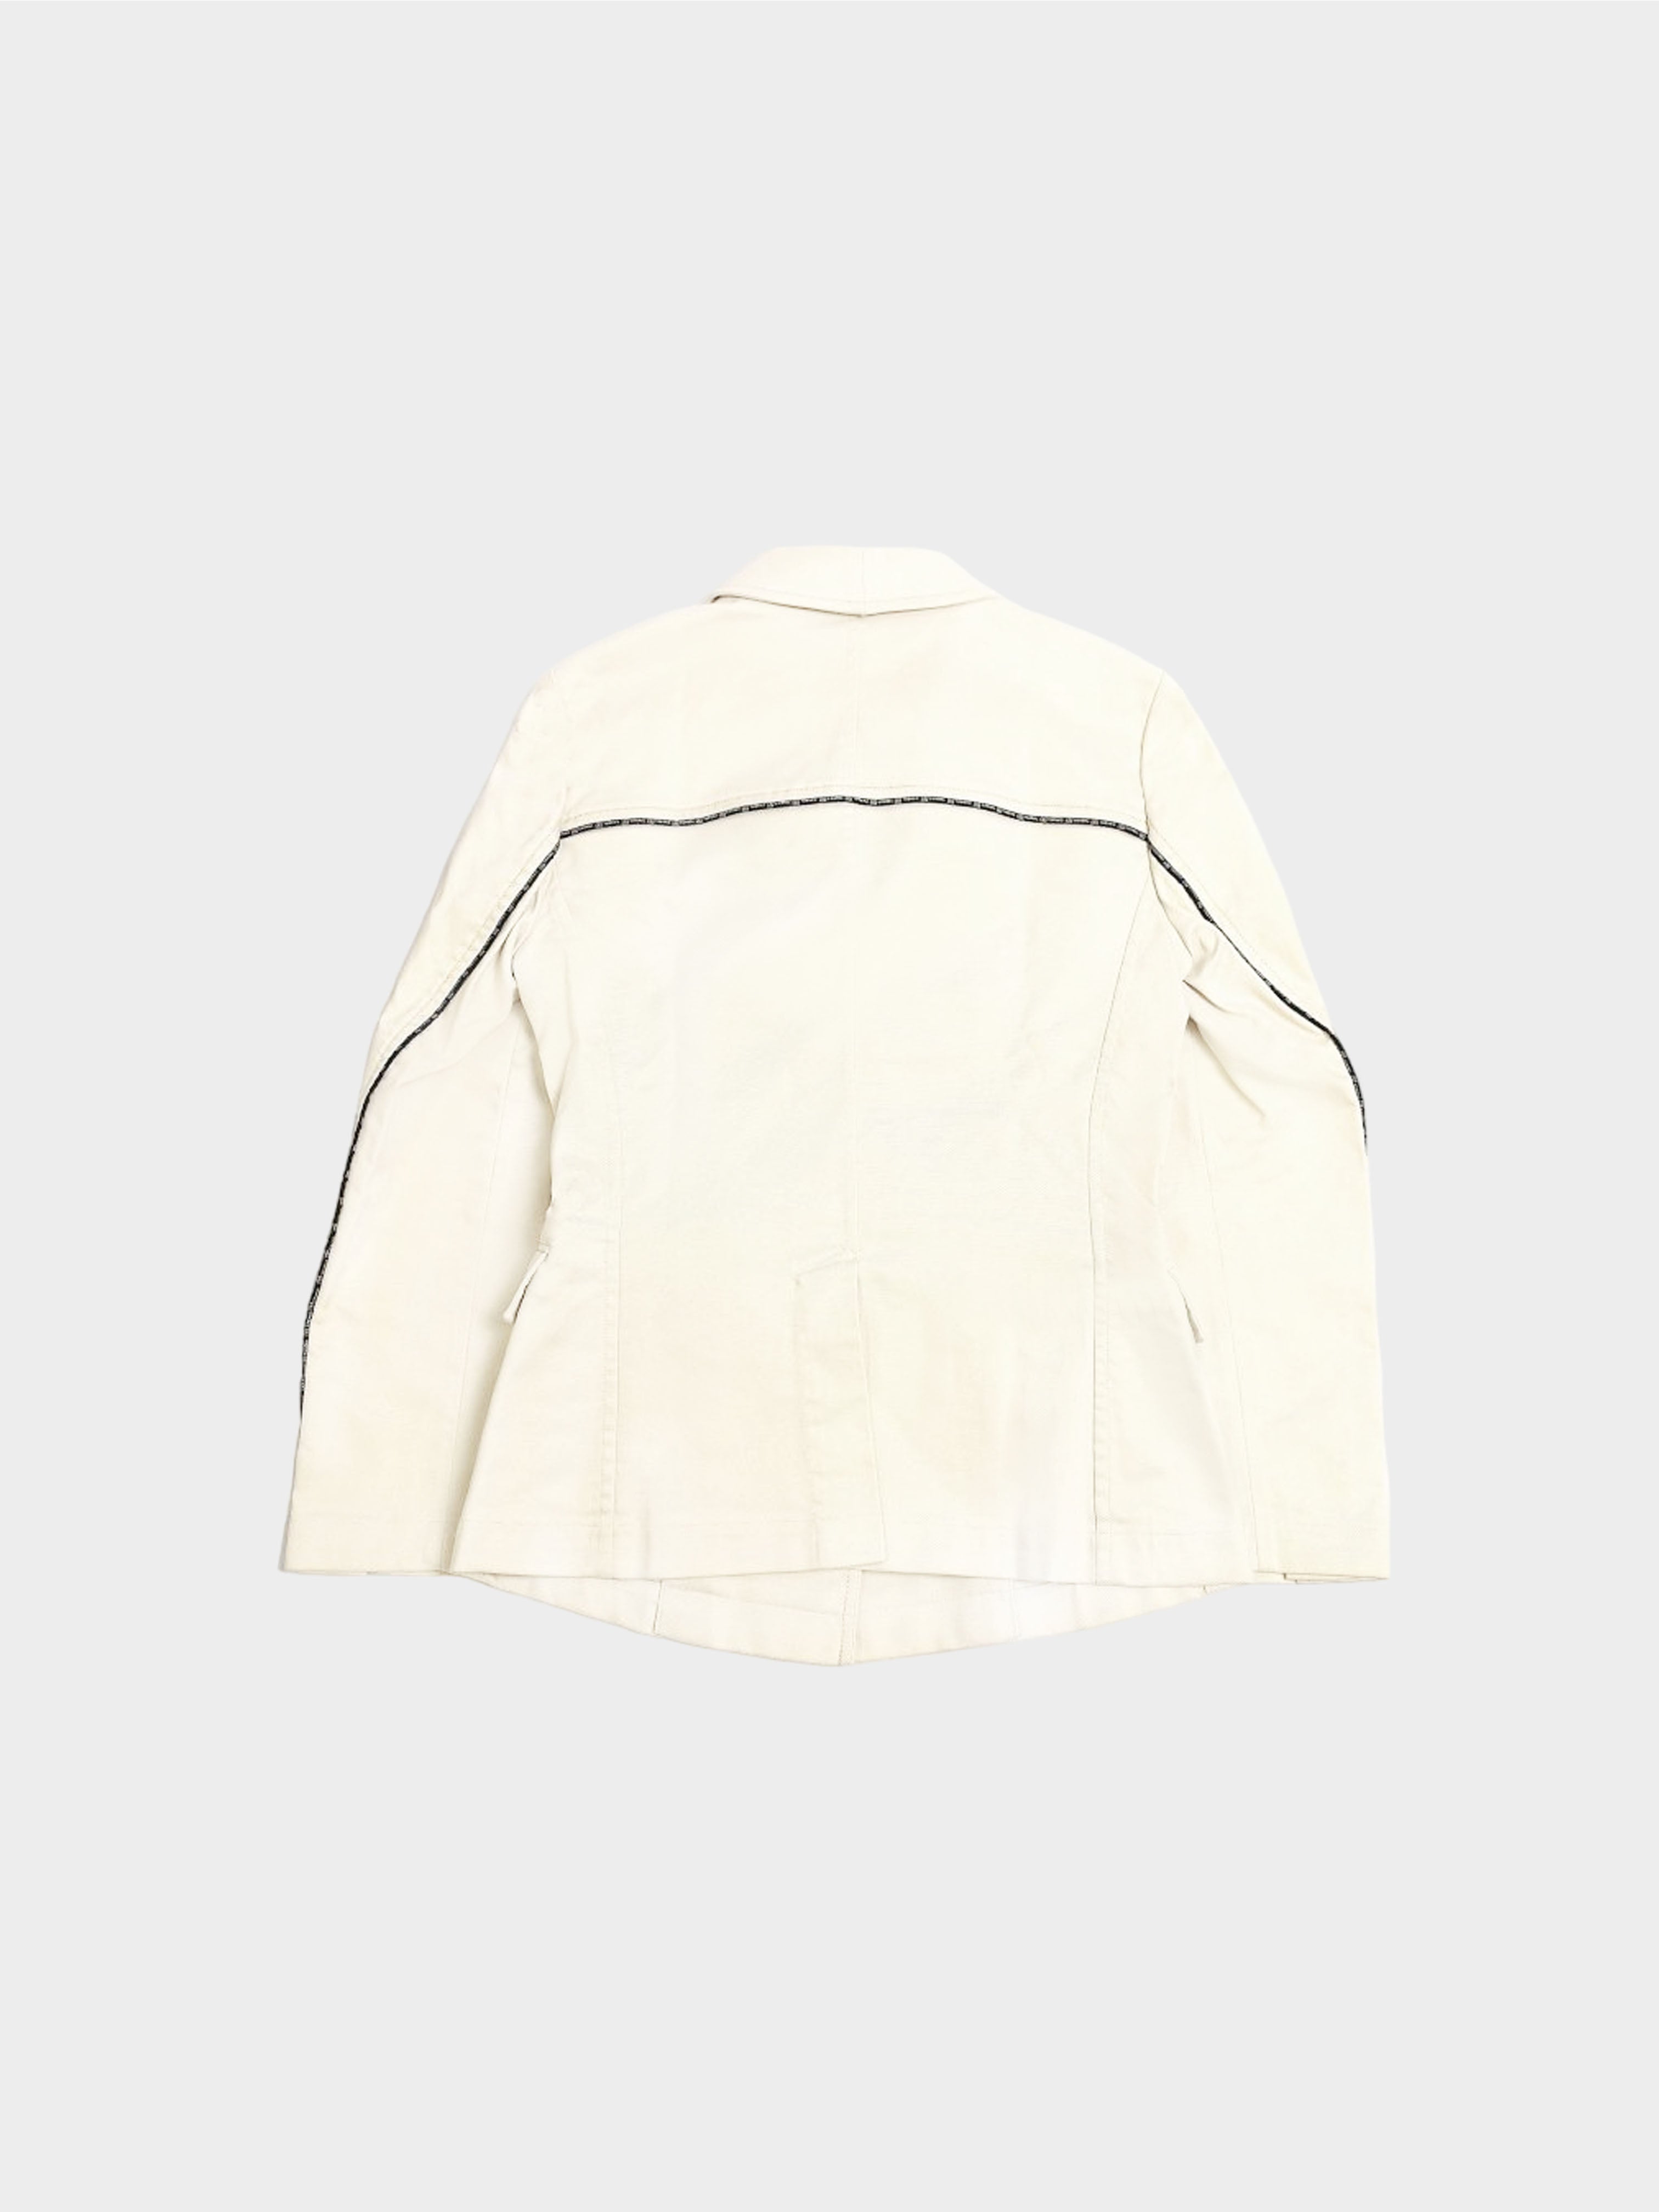 Chanel SS 2004 Off White Single Breasted Jacket